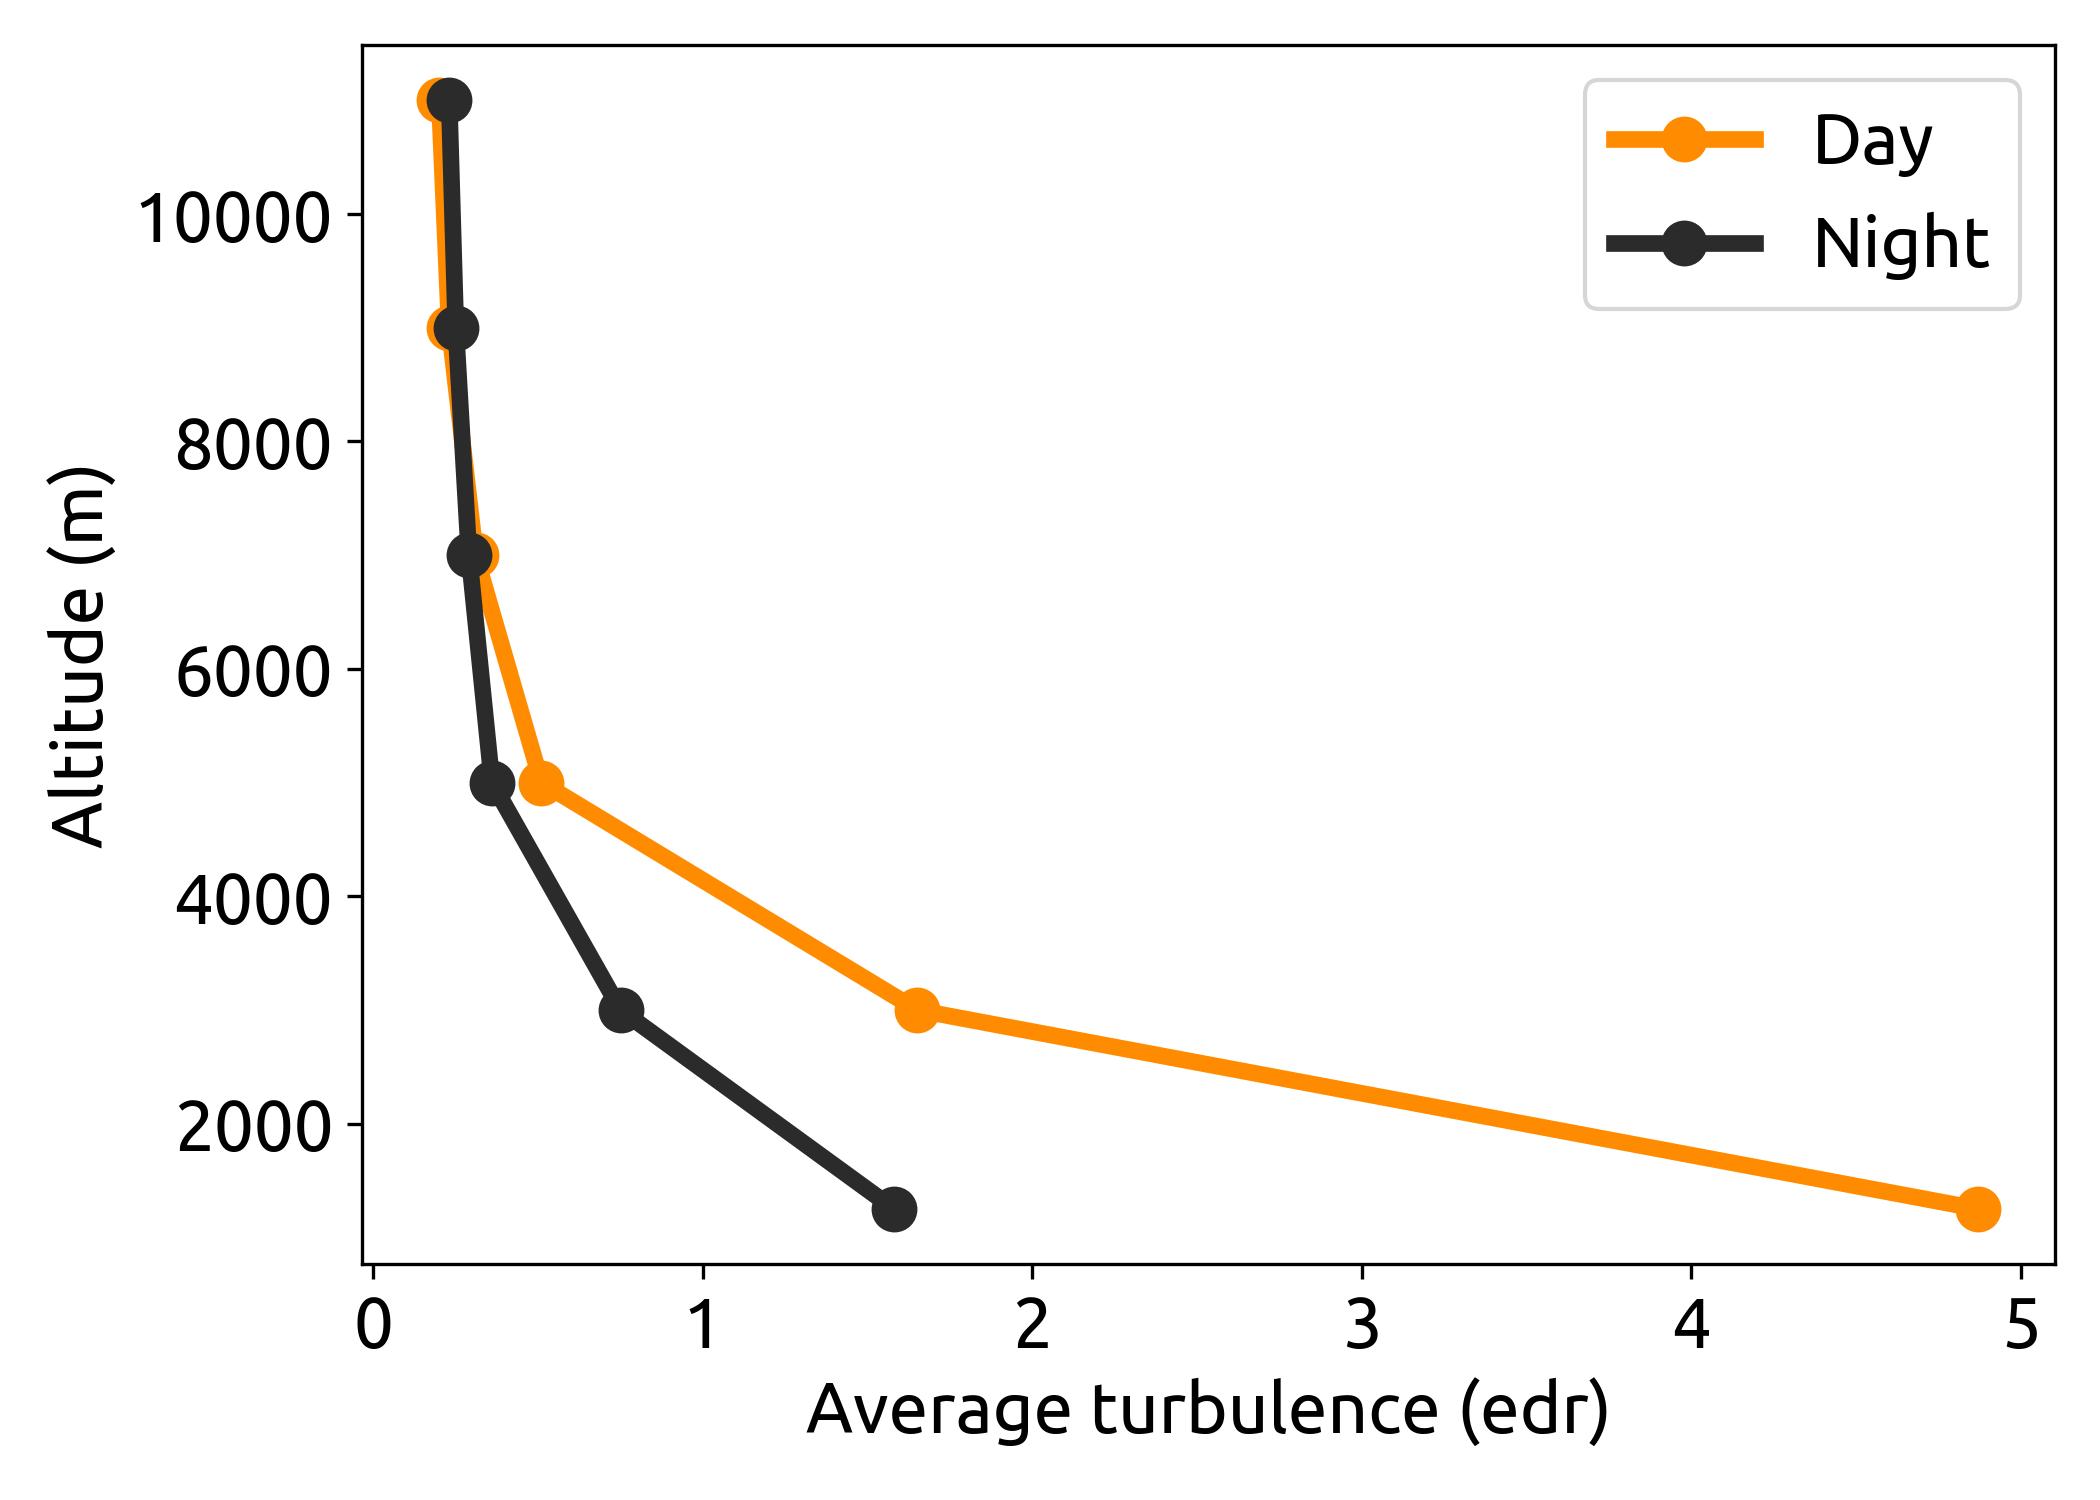 turbulence as a function of altitude given by the amdar measurements